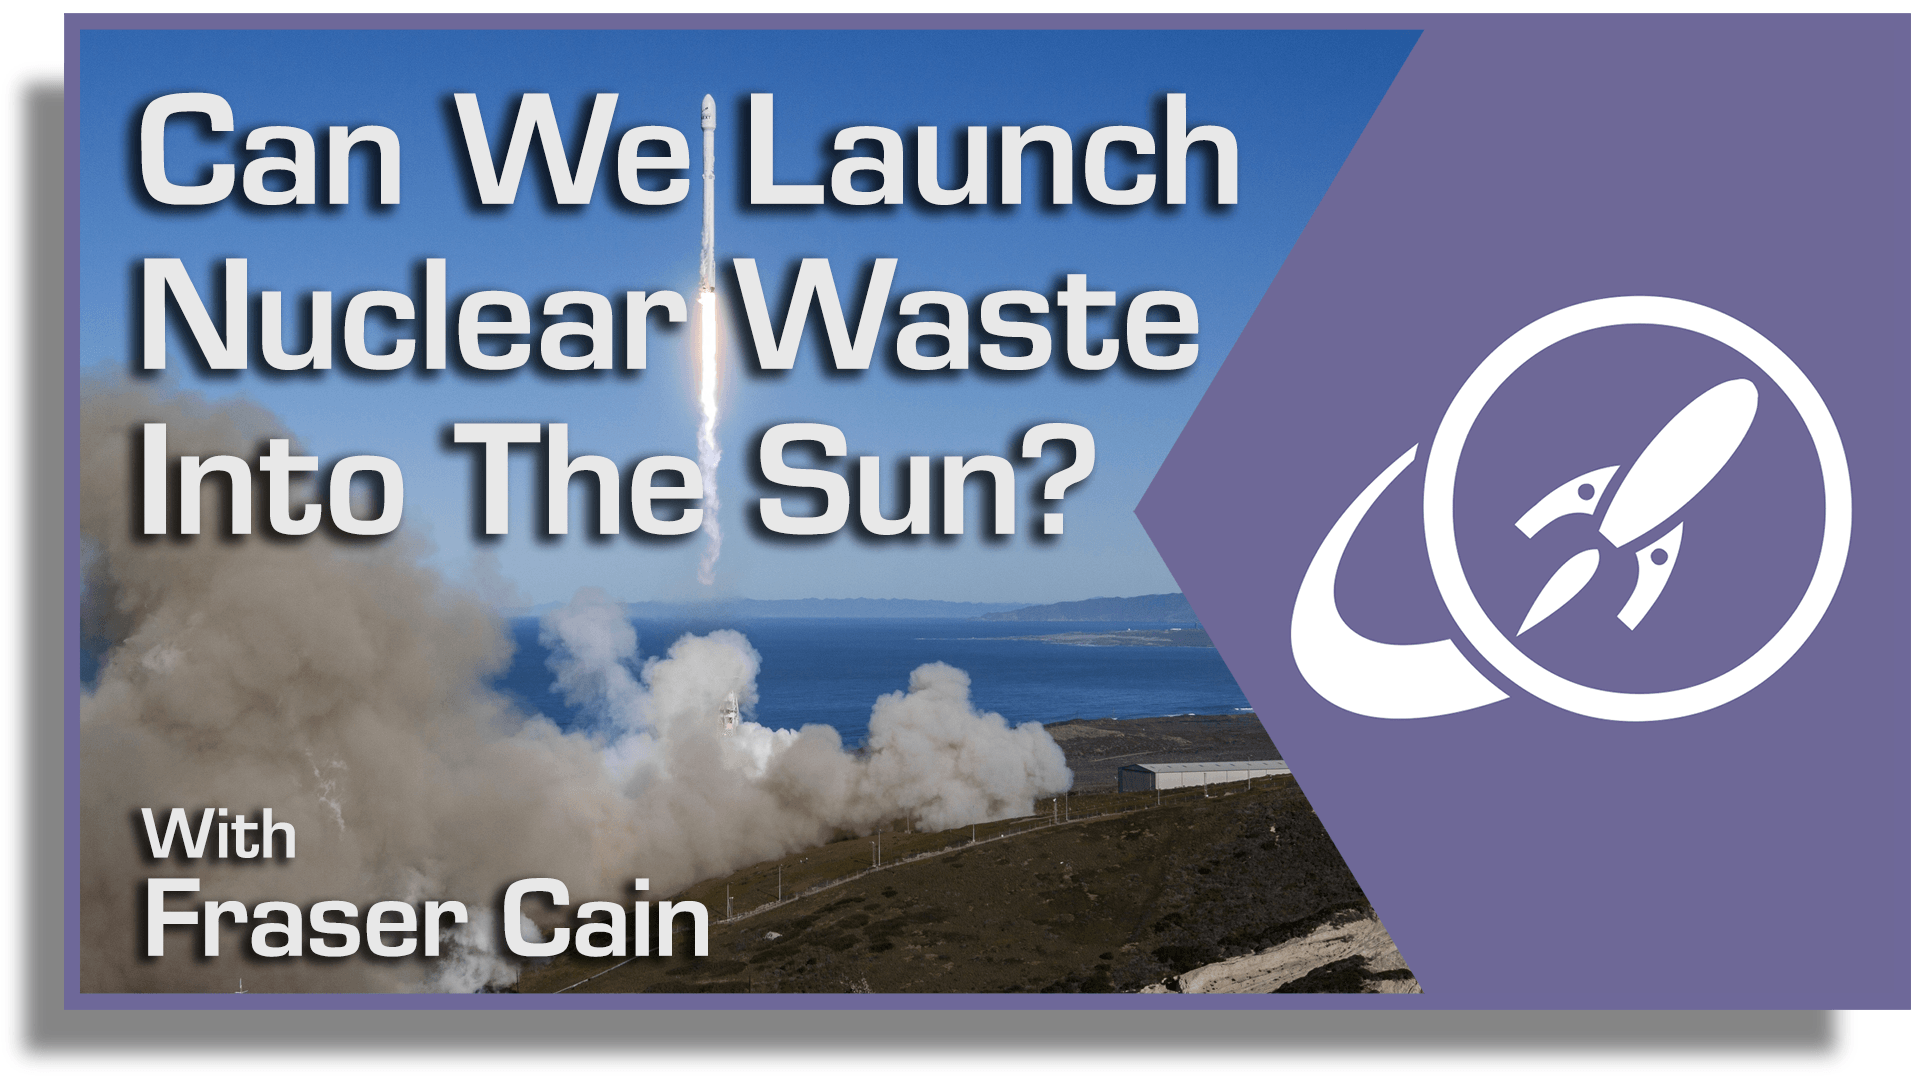 Can We Launch Nuclear Waste Into the Sun?